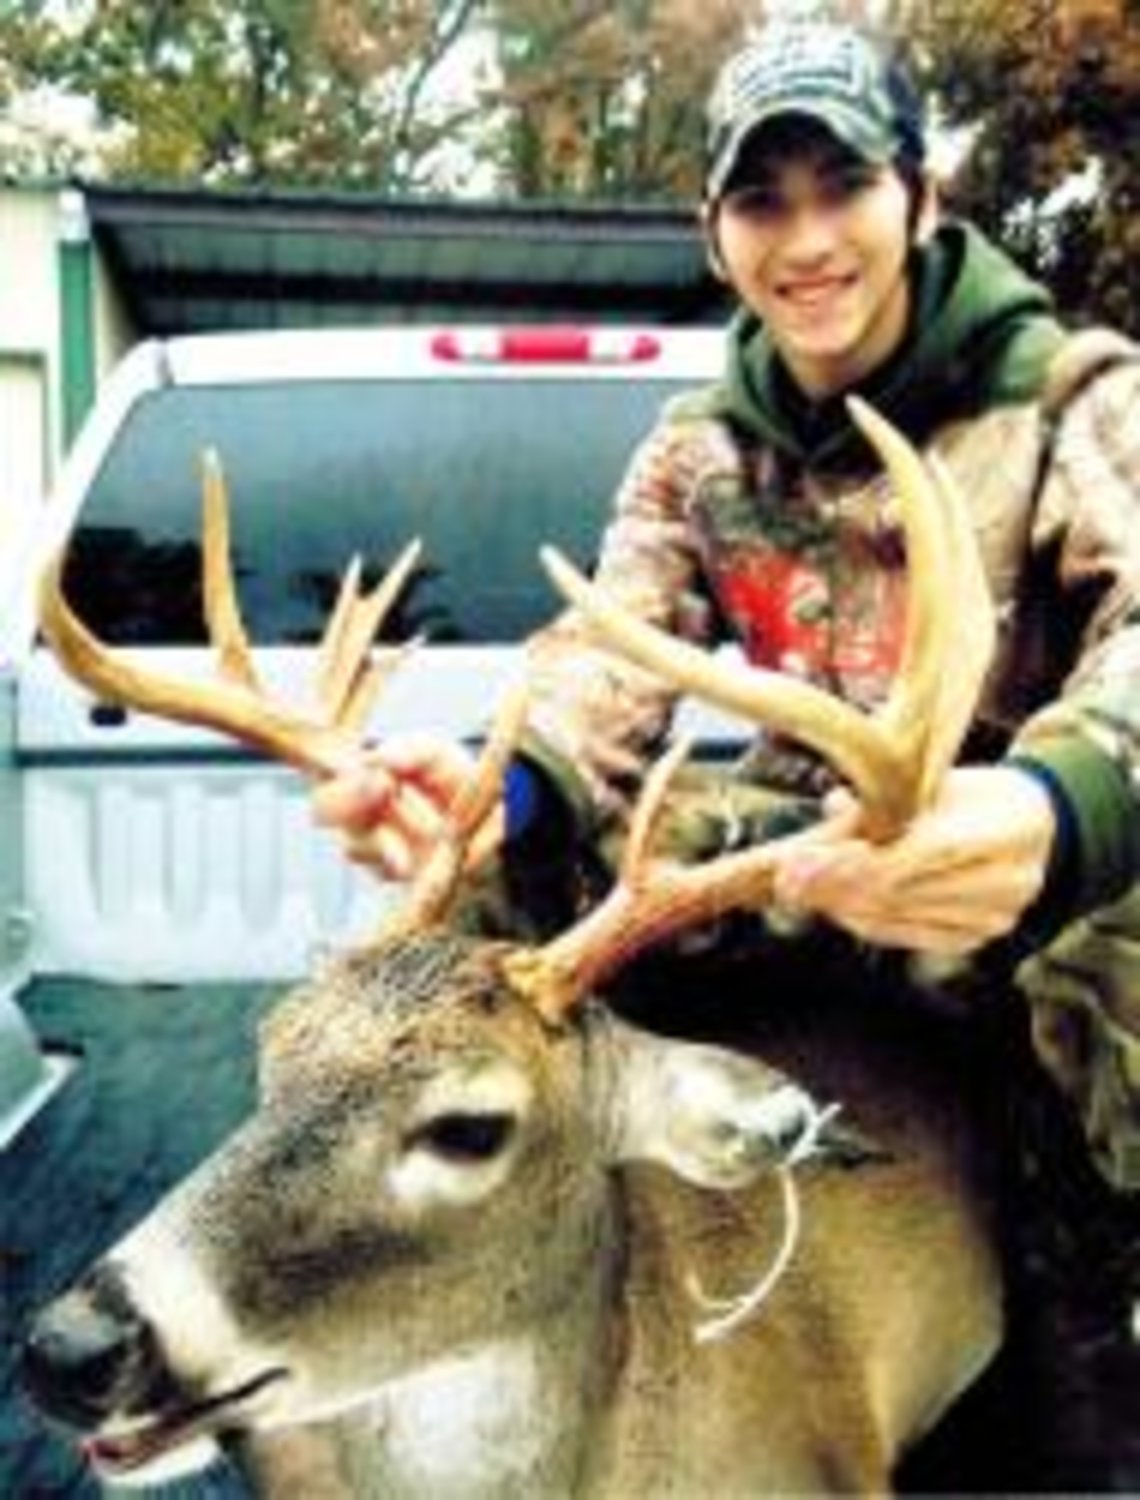 Kolby Hunnycut, 18, Burleson, shot this 10-point buck during a hunting trip in the Yantis area in November. He is the grandson of Hadley and Gloria Hunnycutt of Yantis.